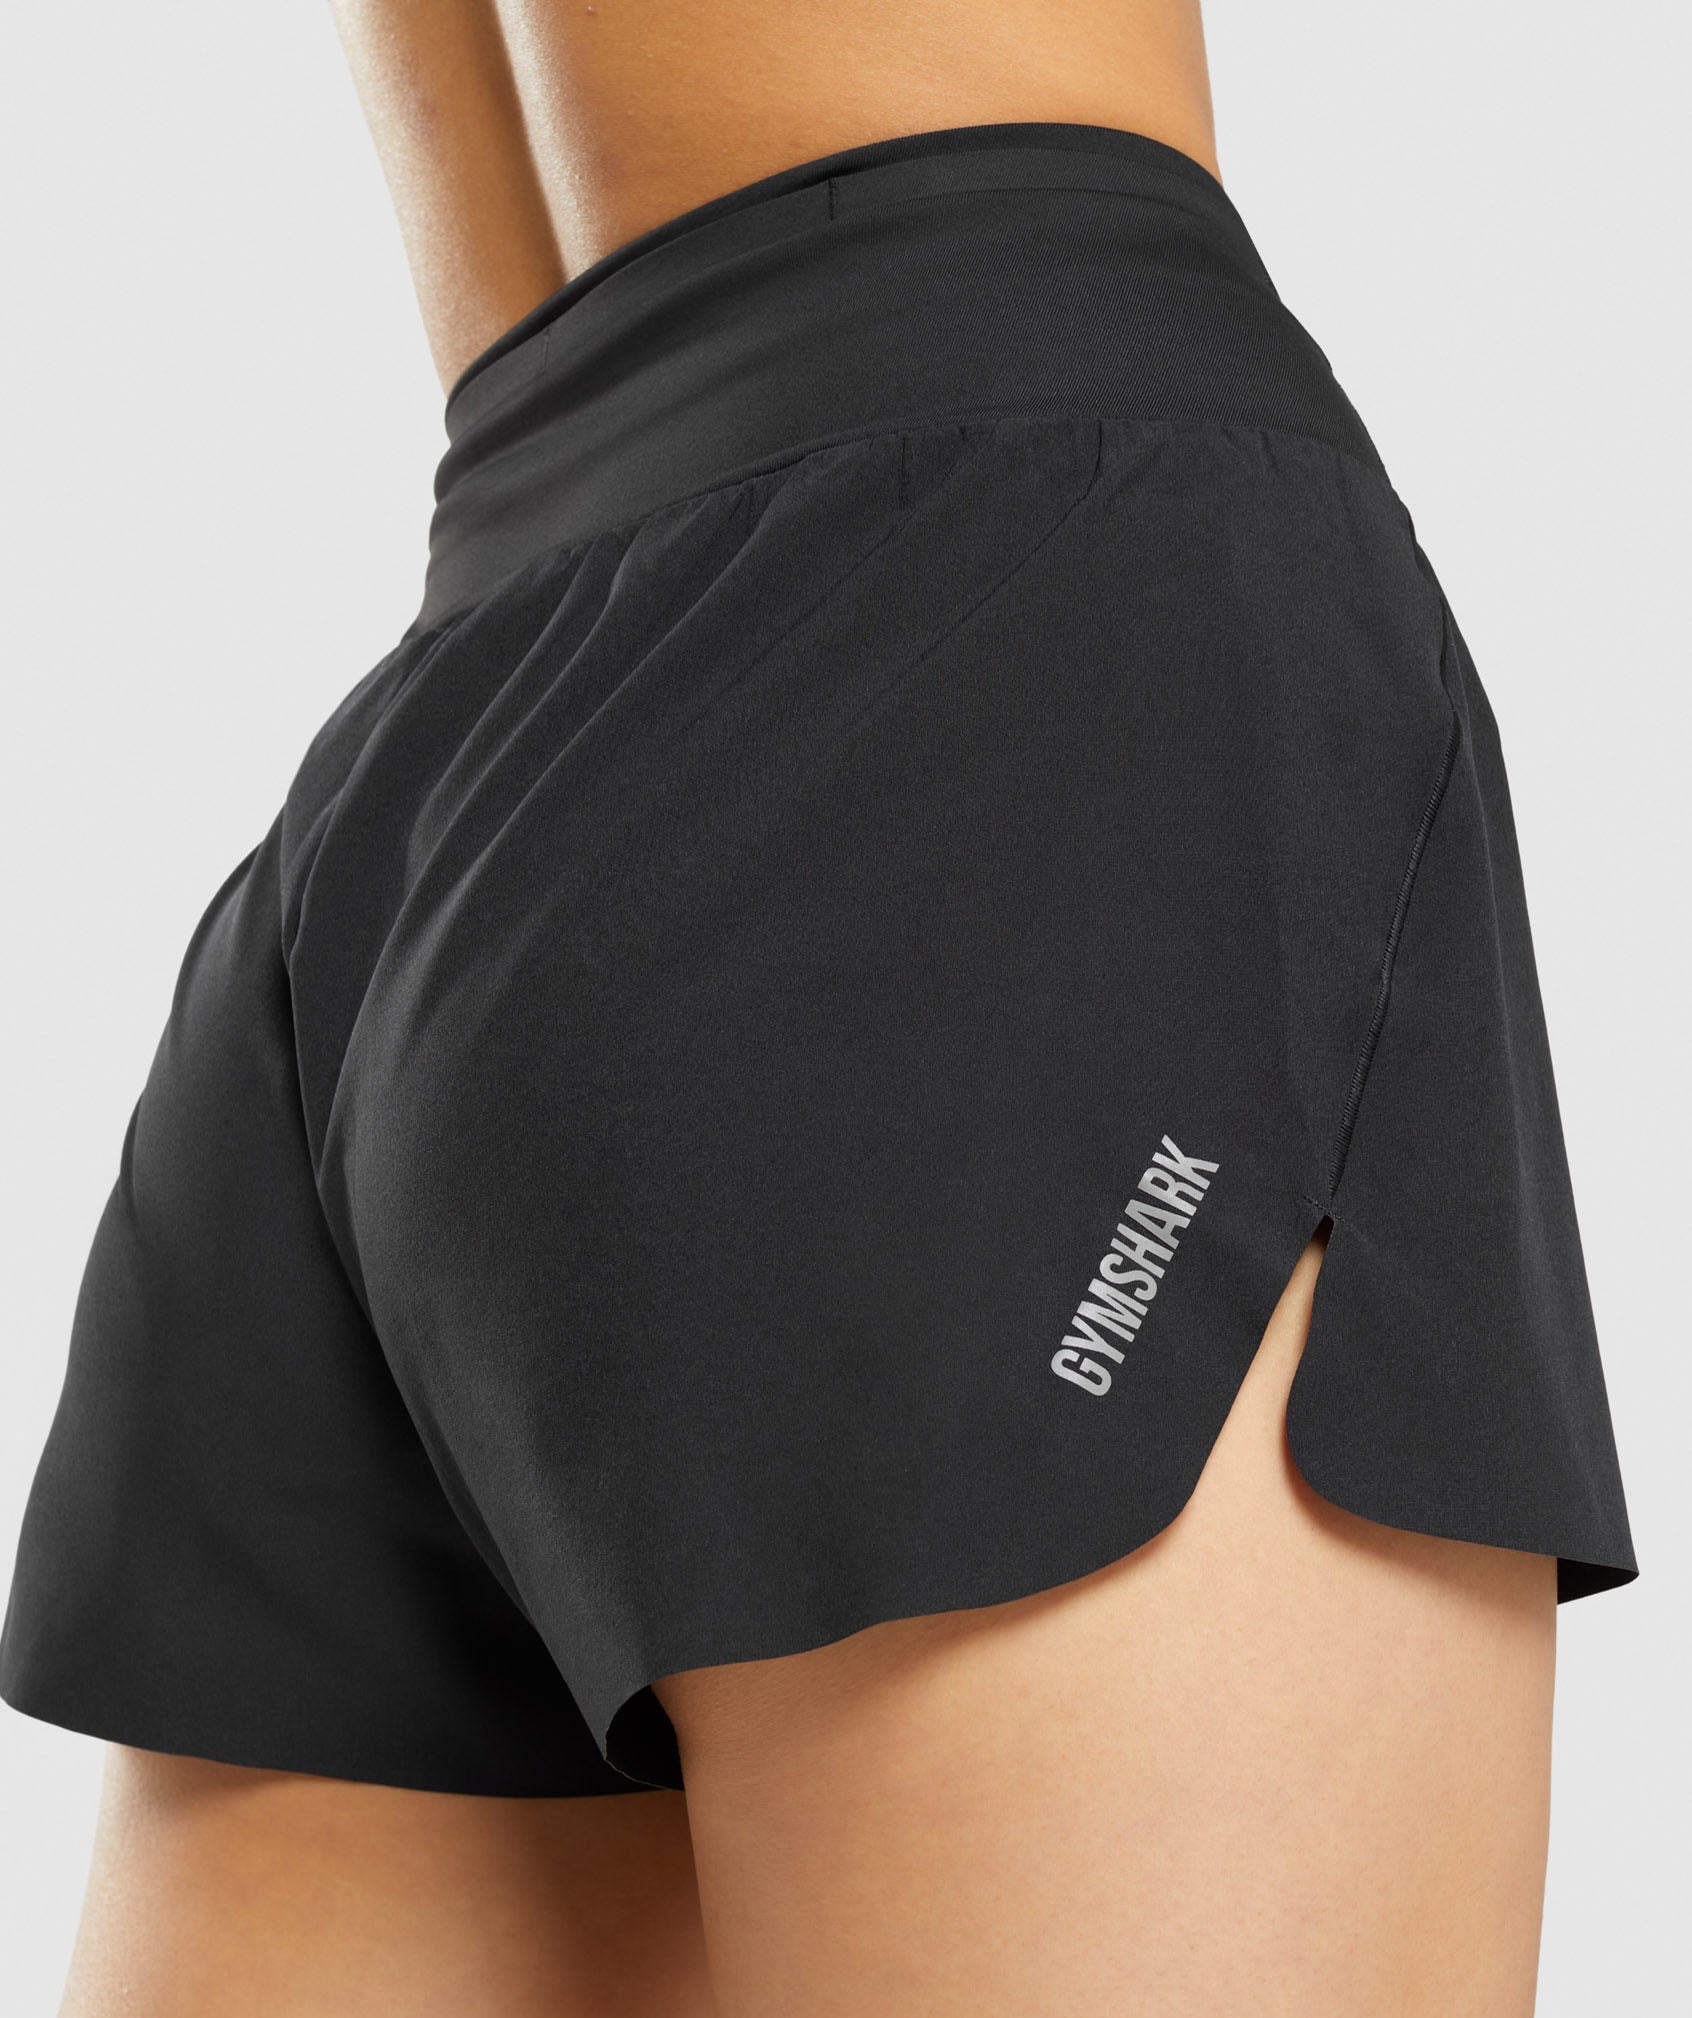 Speed Shorts in Black - view 6